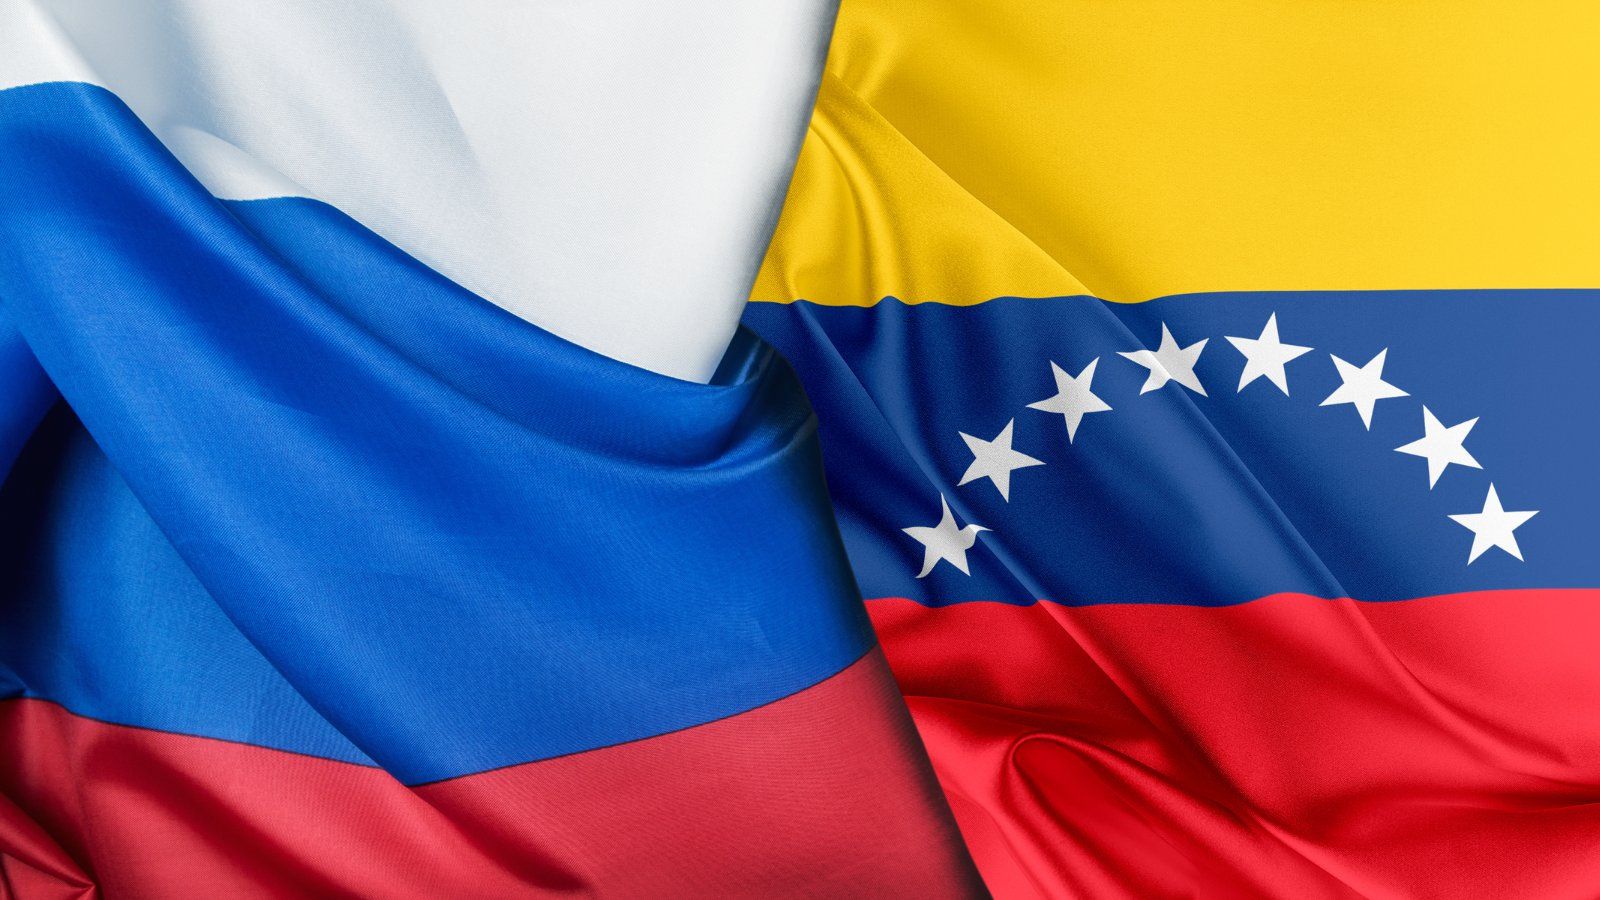 Russia and Venezuela intend to increase daily oil production